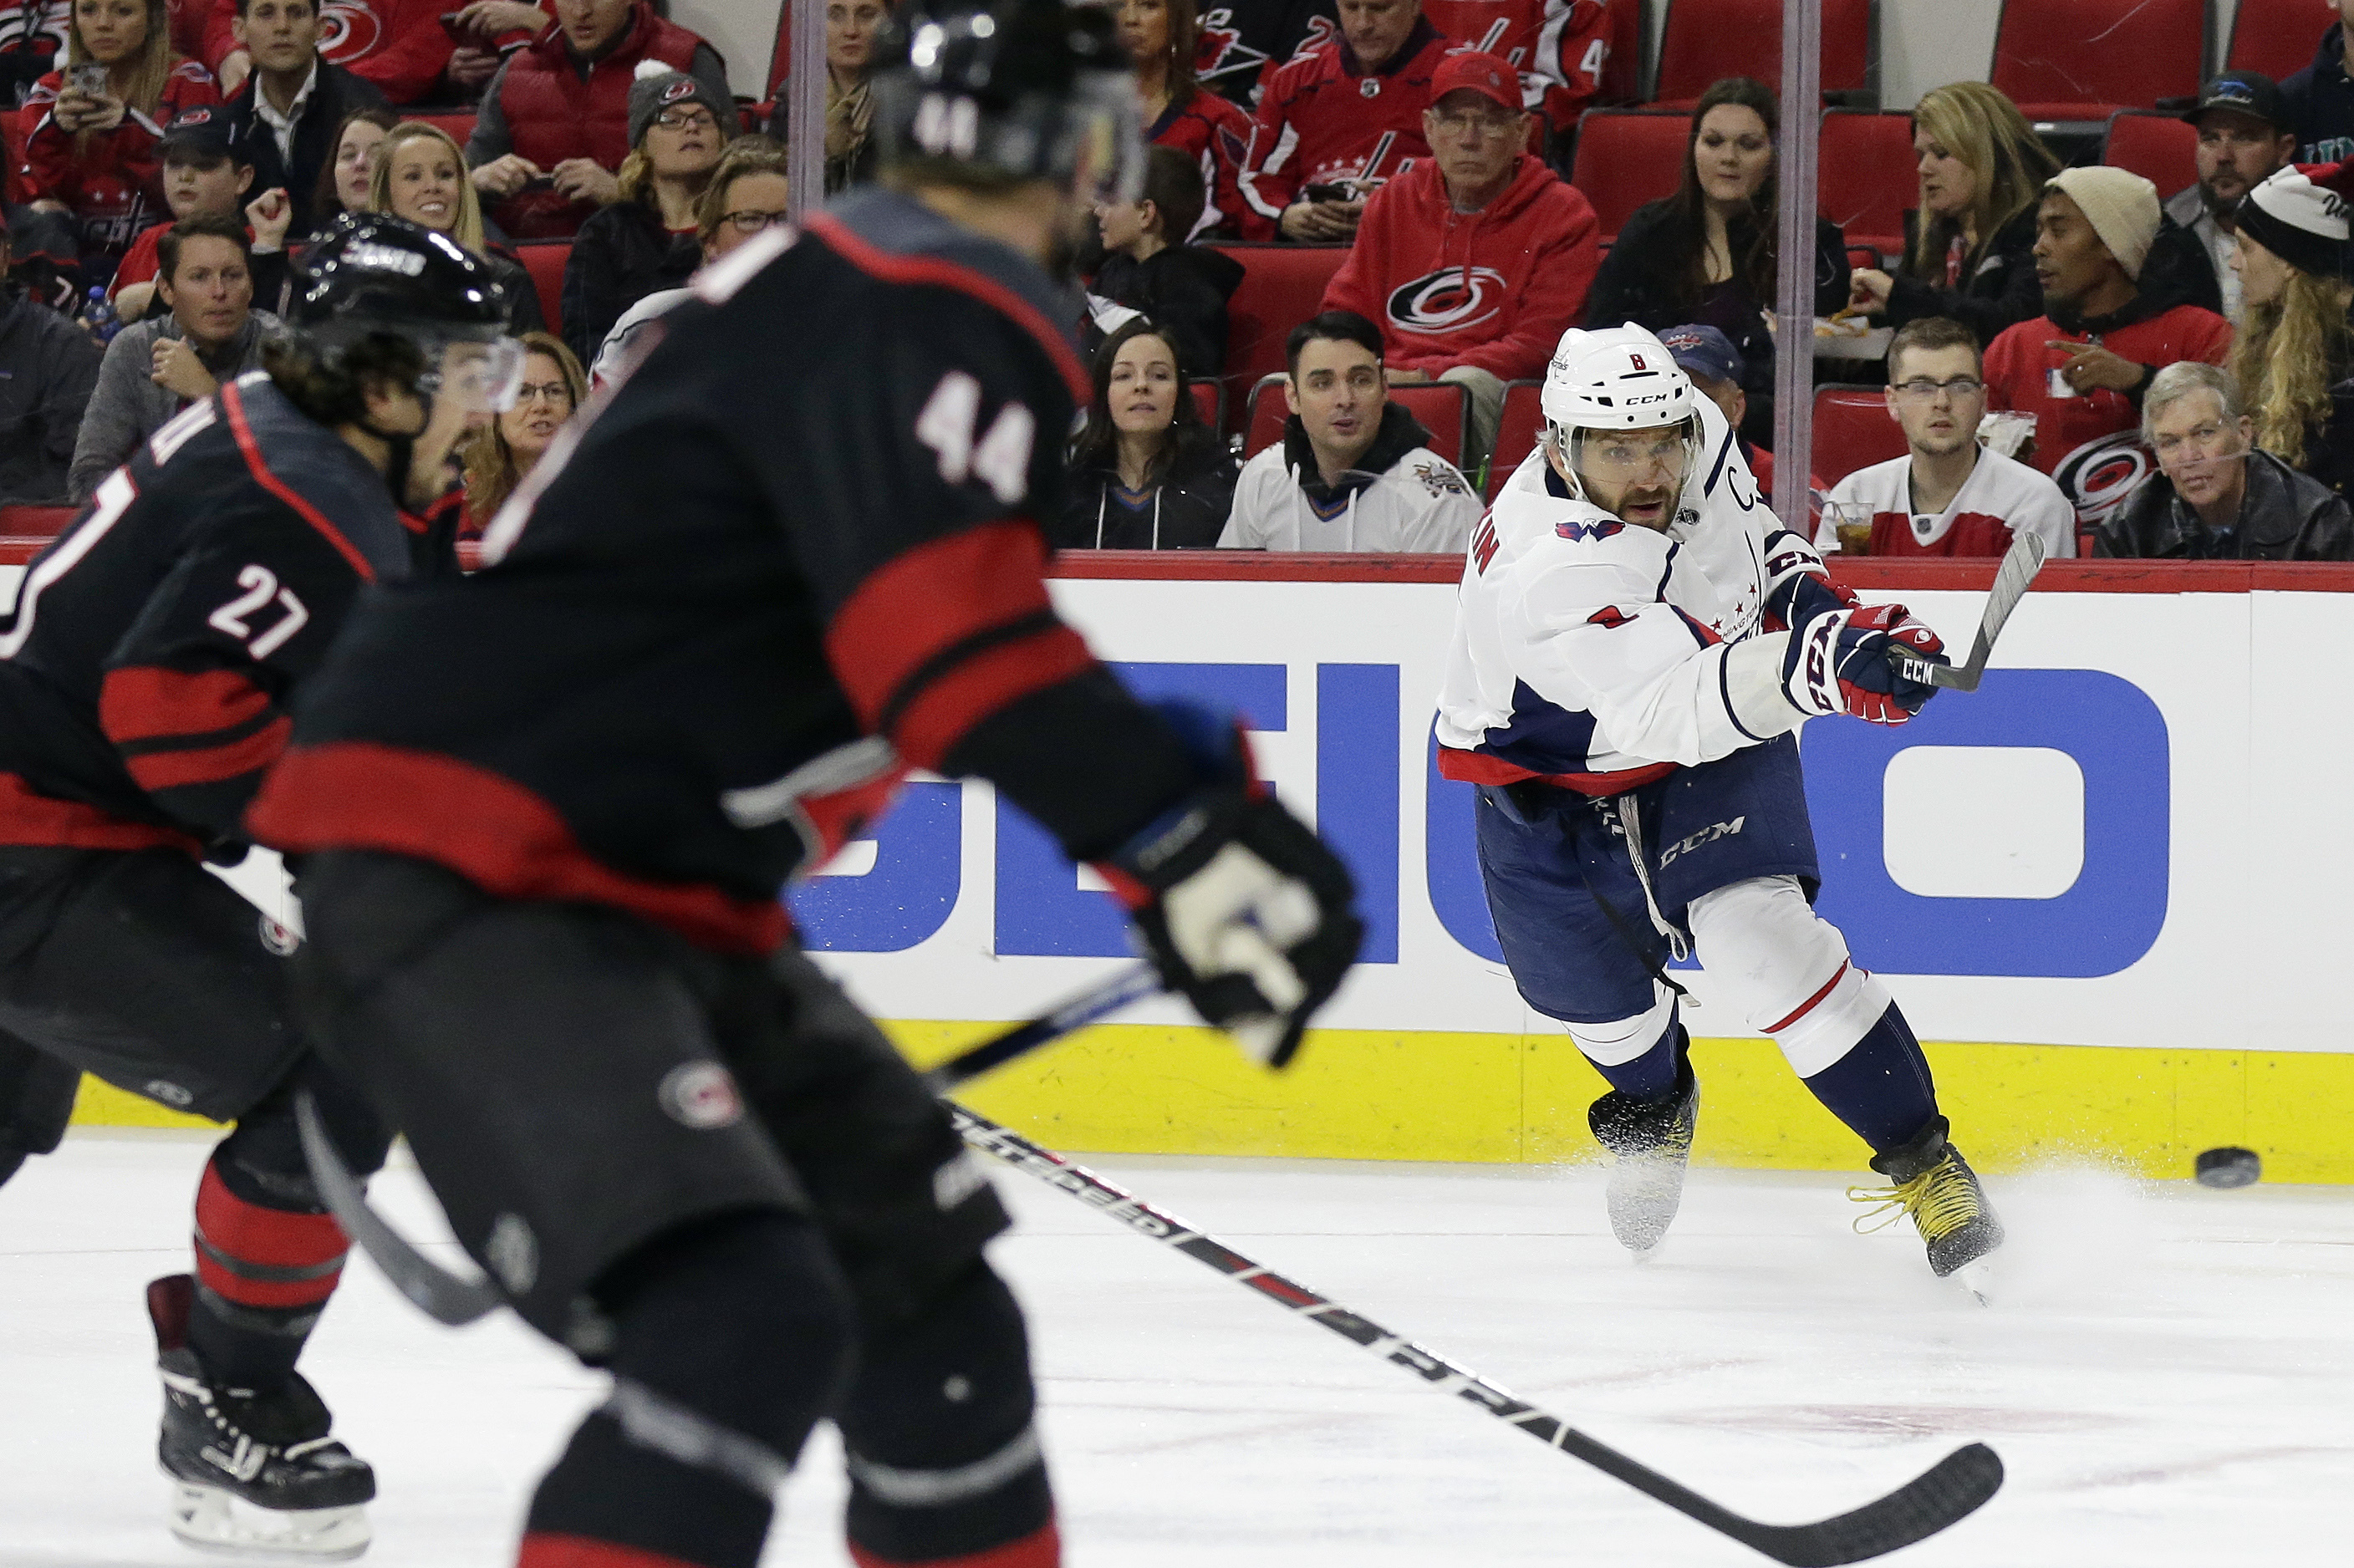 Ovechkin, Vrana lead Caps over Hurricanes 6-5 in shootout